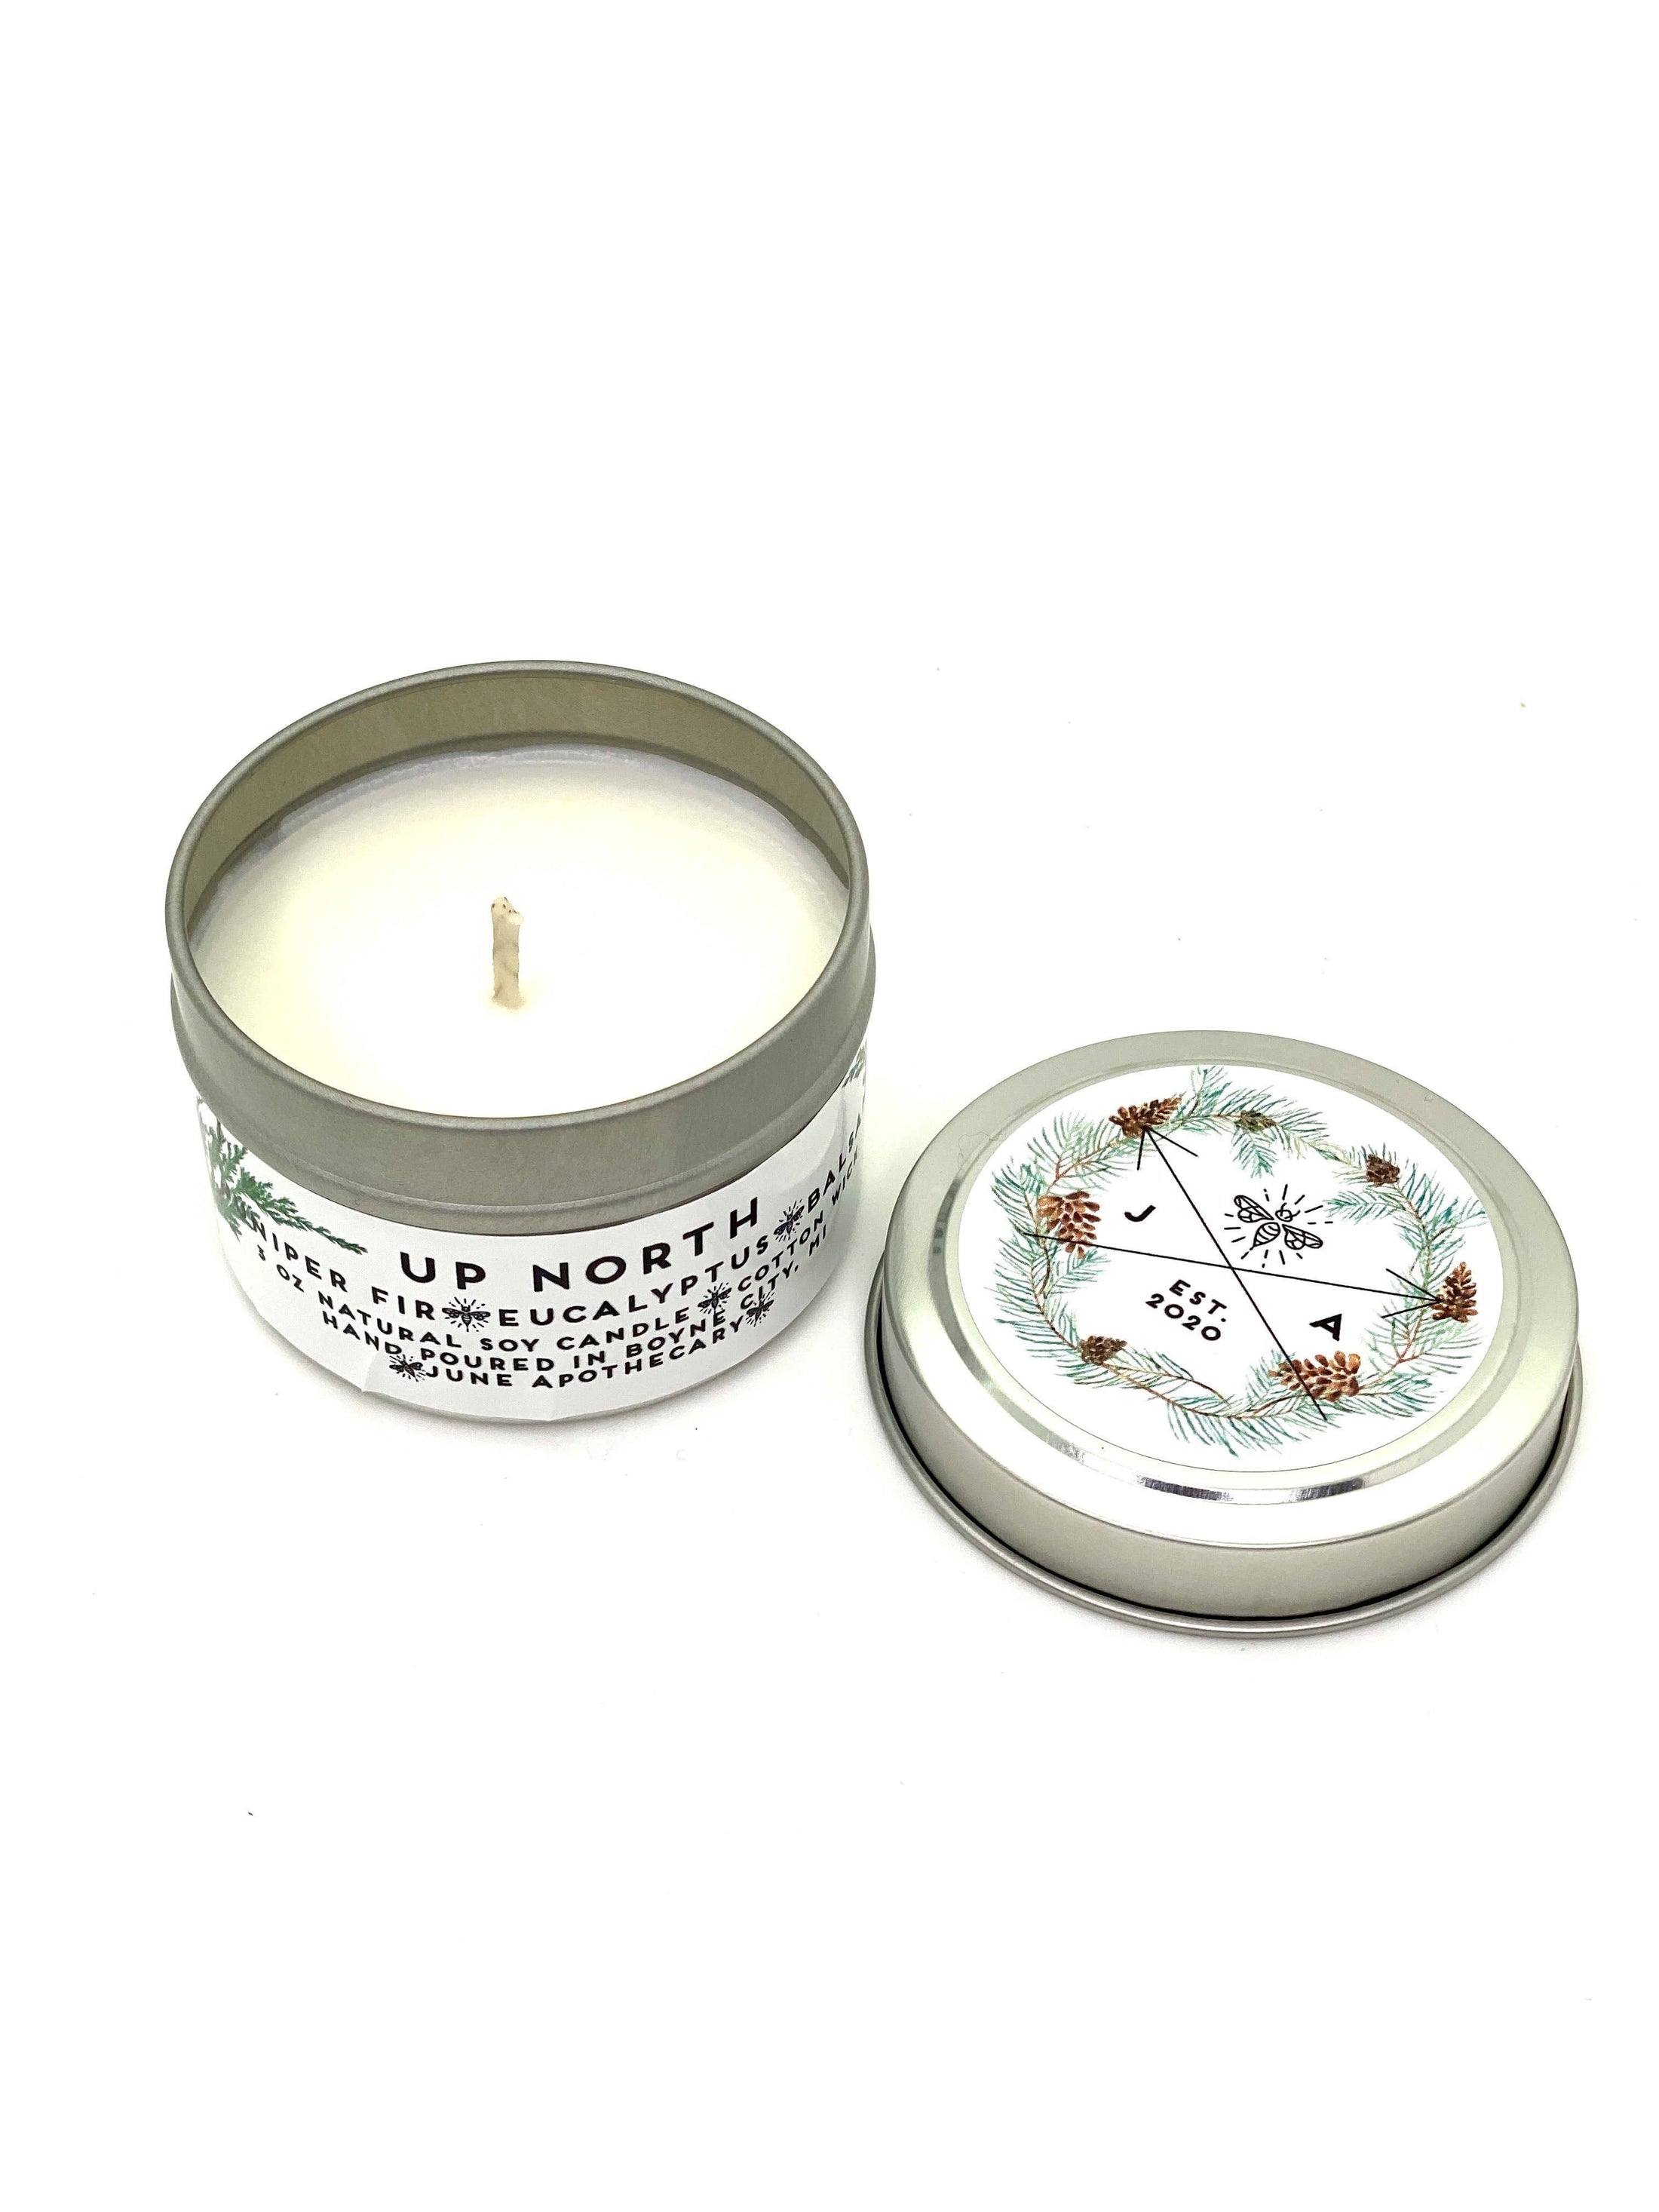 Up North 4oz Travel Candle